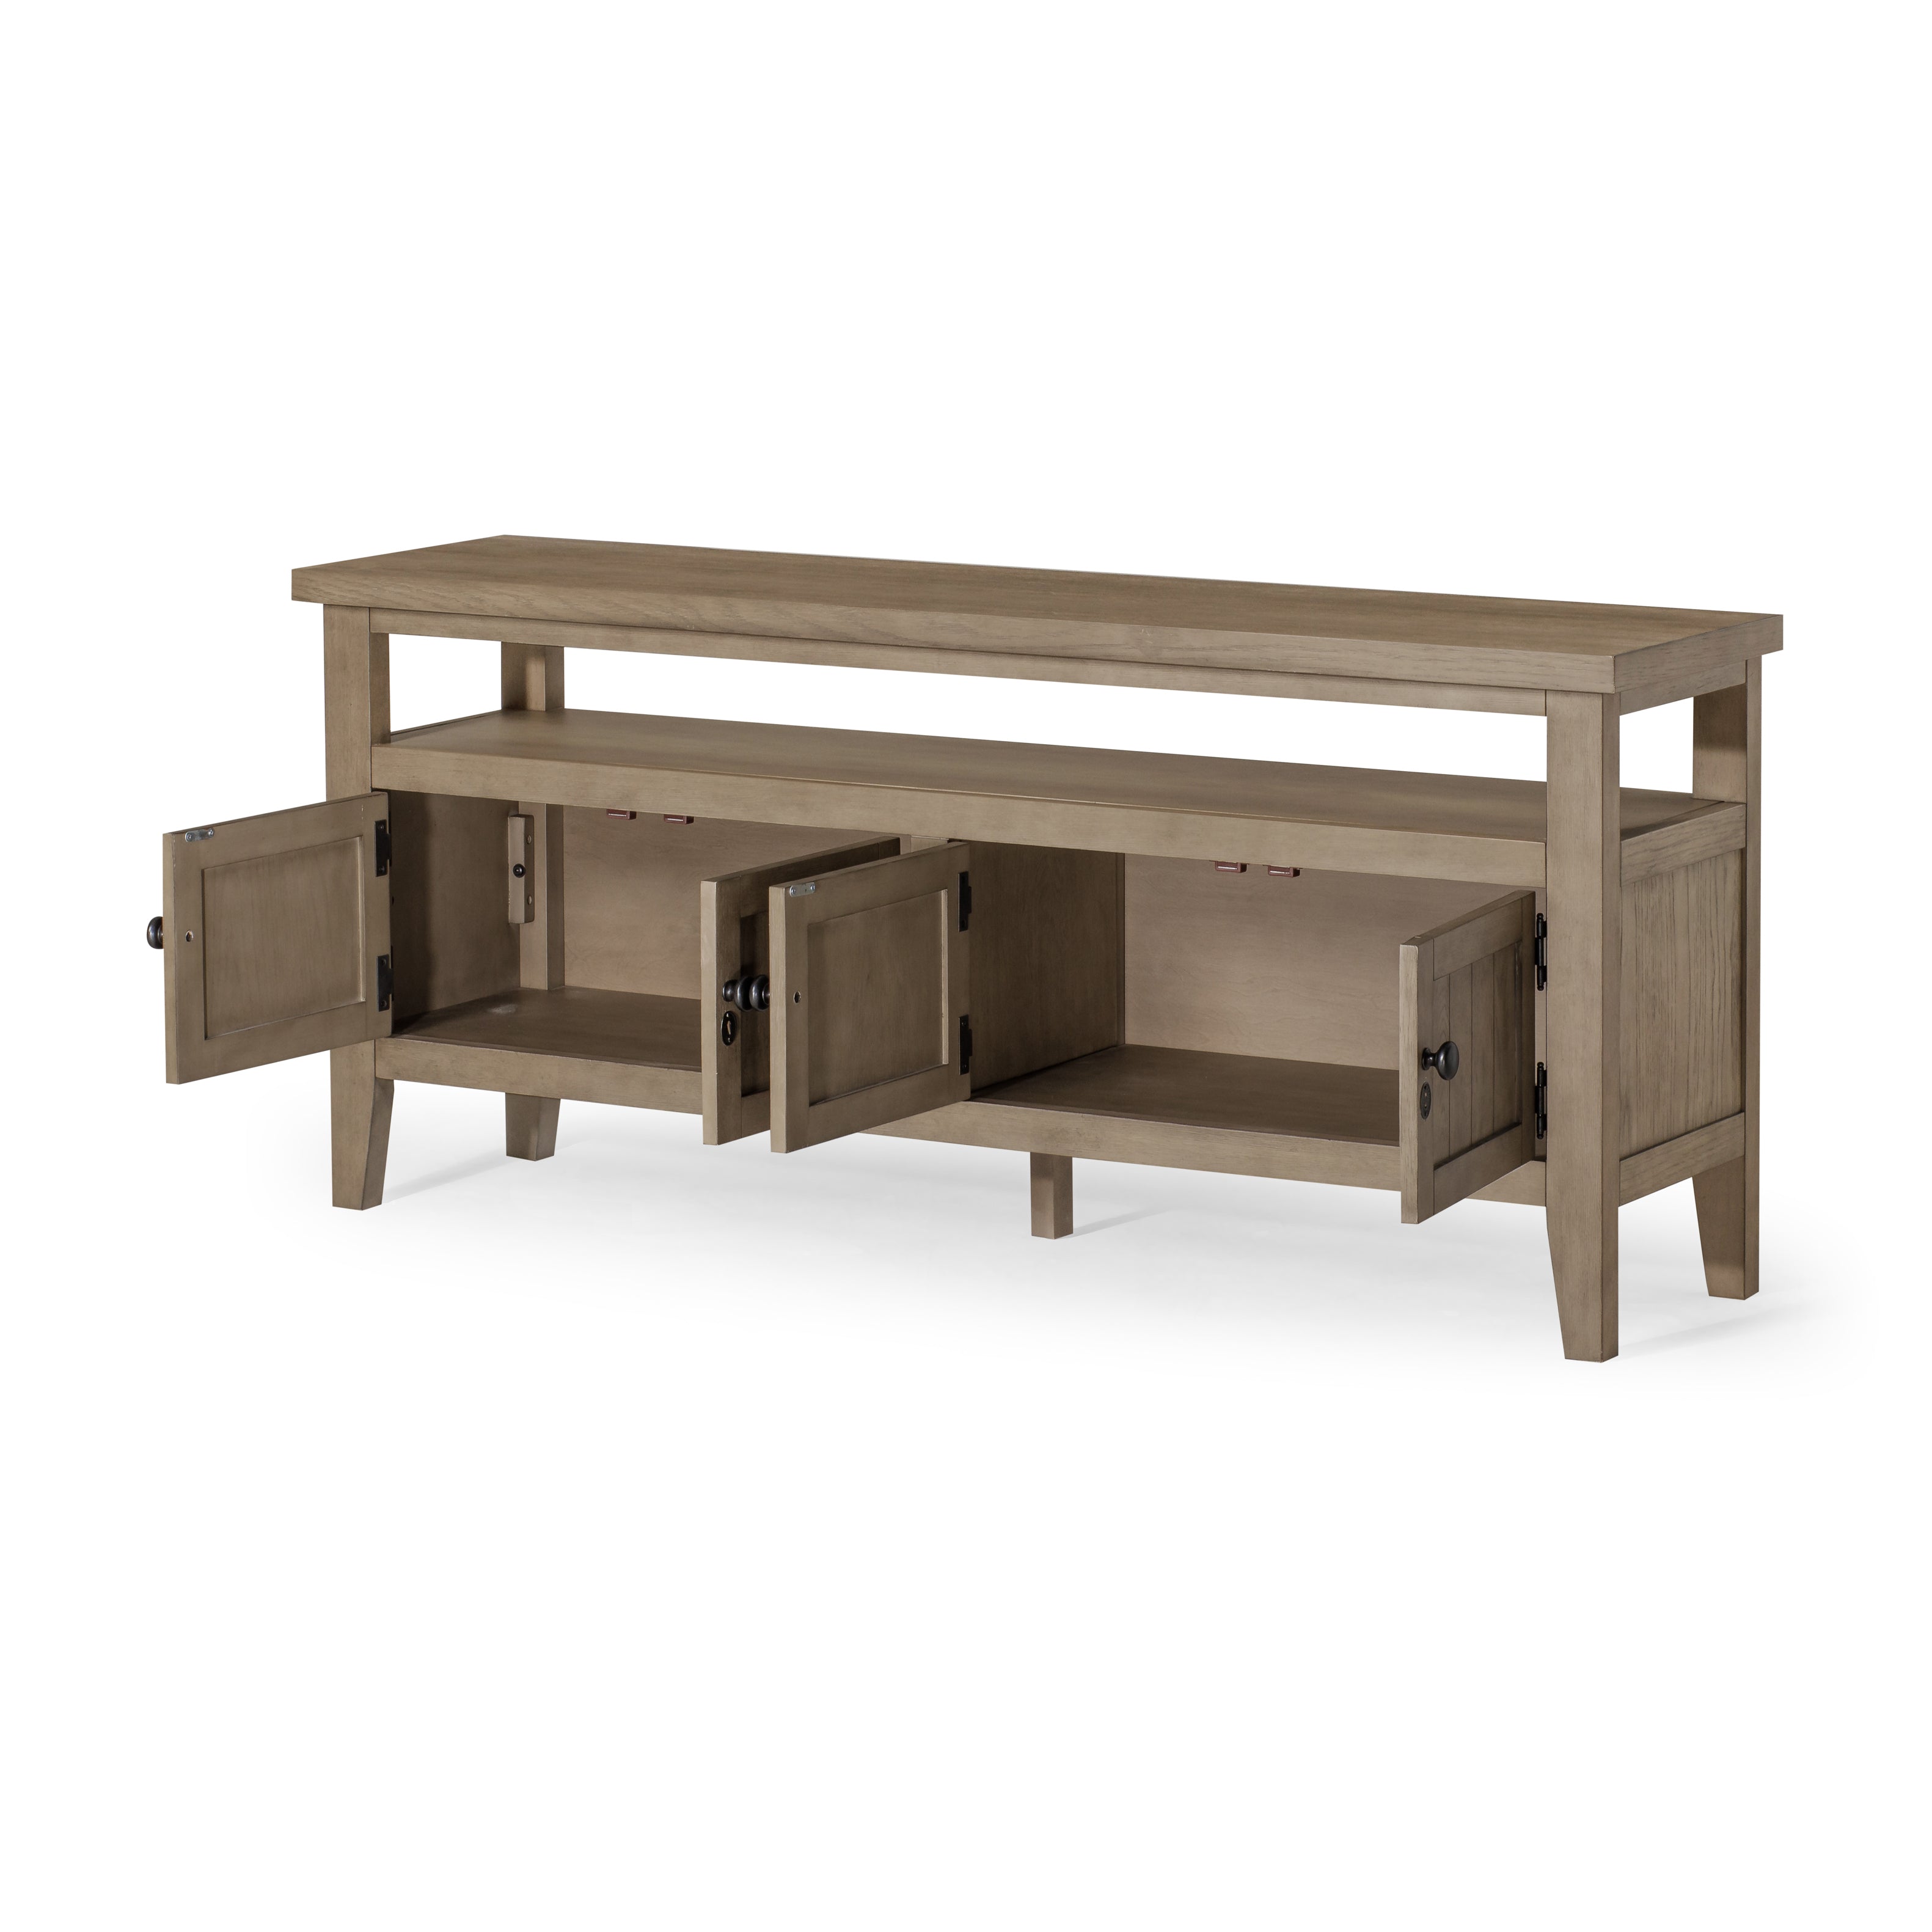 Turner Classical Wooden Media Unit in Antiqued Grey Finish in Media Units by Maven Lane